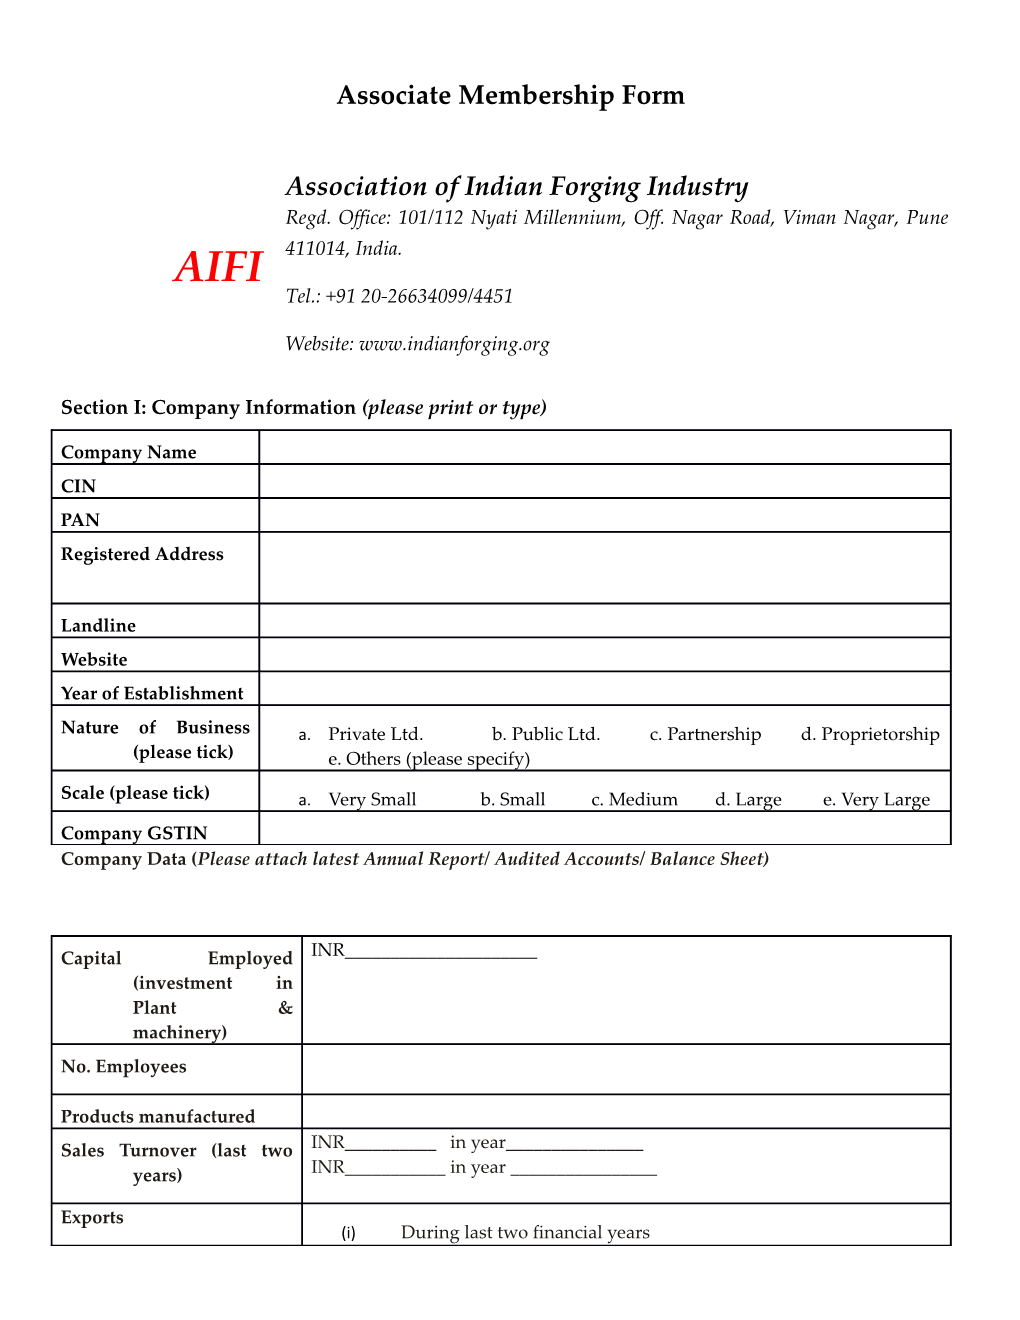 Association of Indian Forging Industry